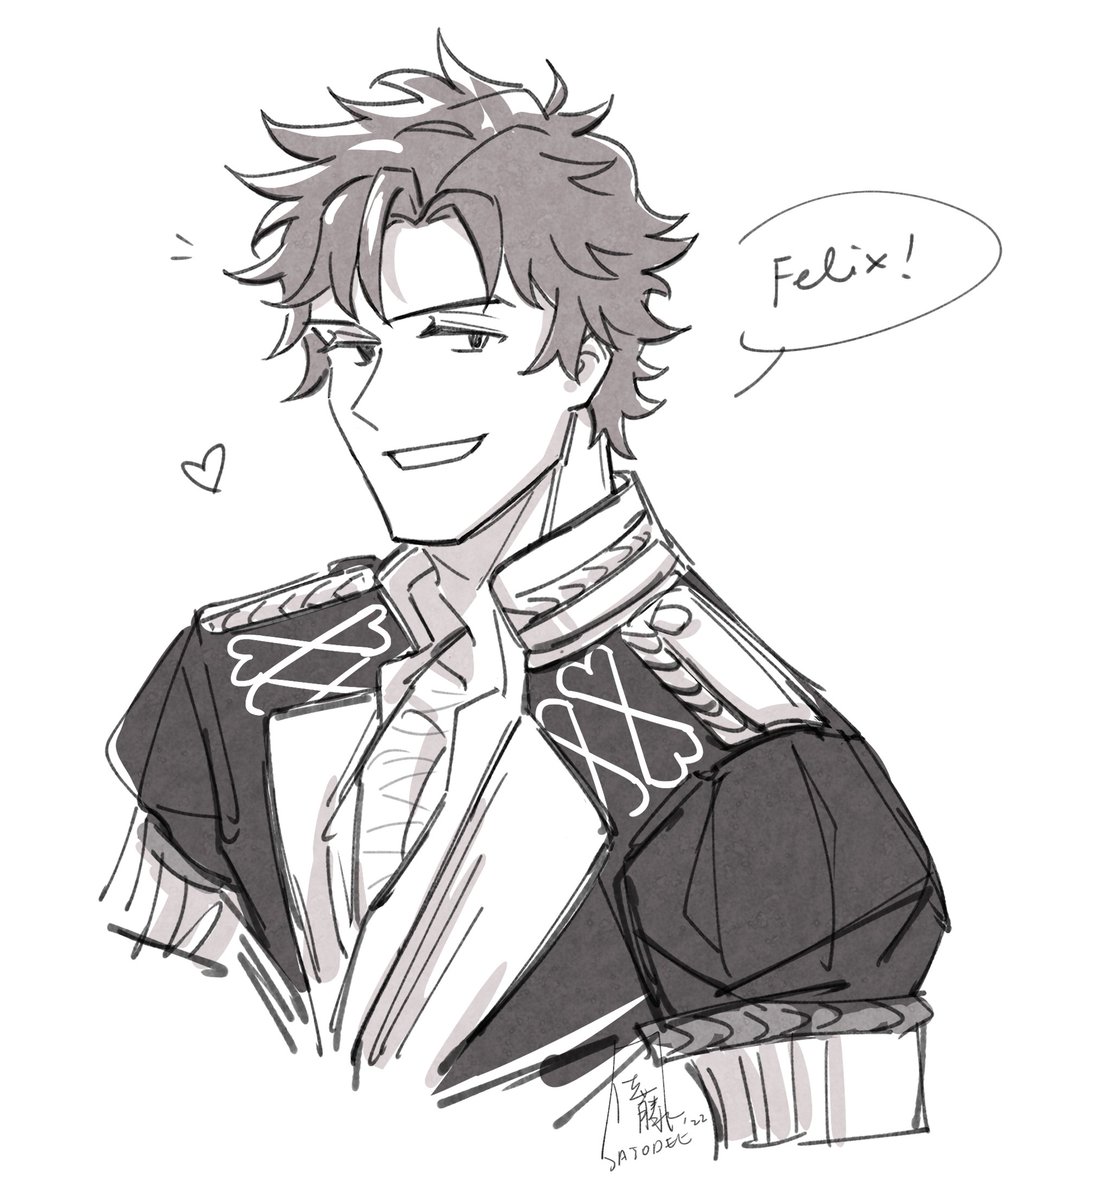 "wanna go to town together?"

trying out a new brushhh

#FE3H #FireEmblemThreeHouses #sylvainjosegautier 